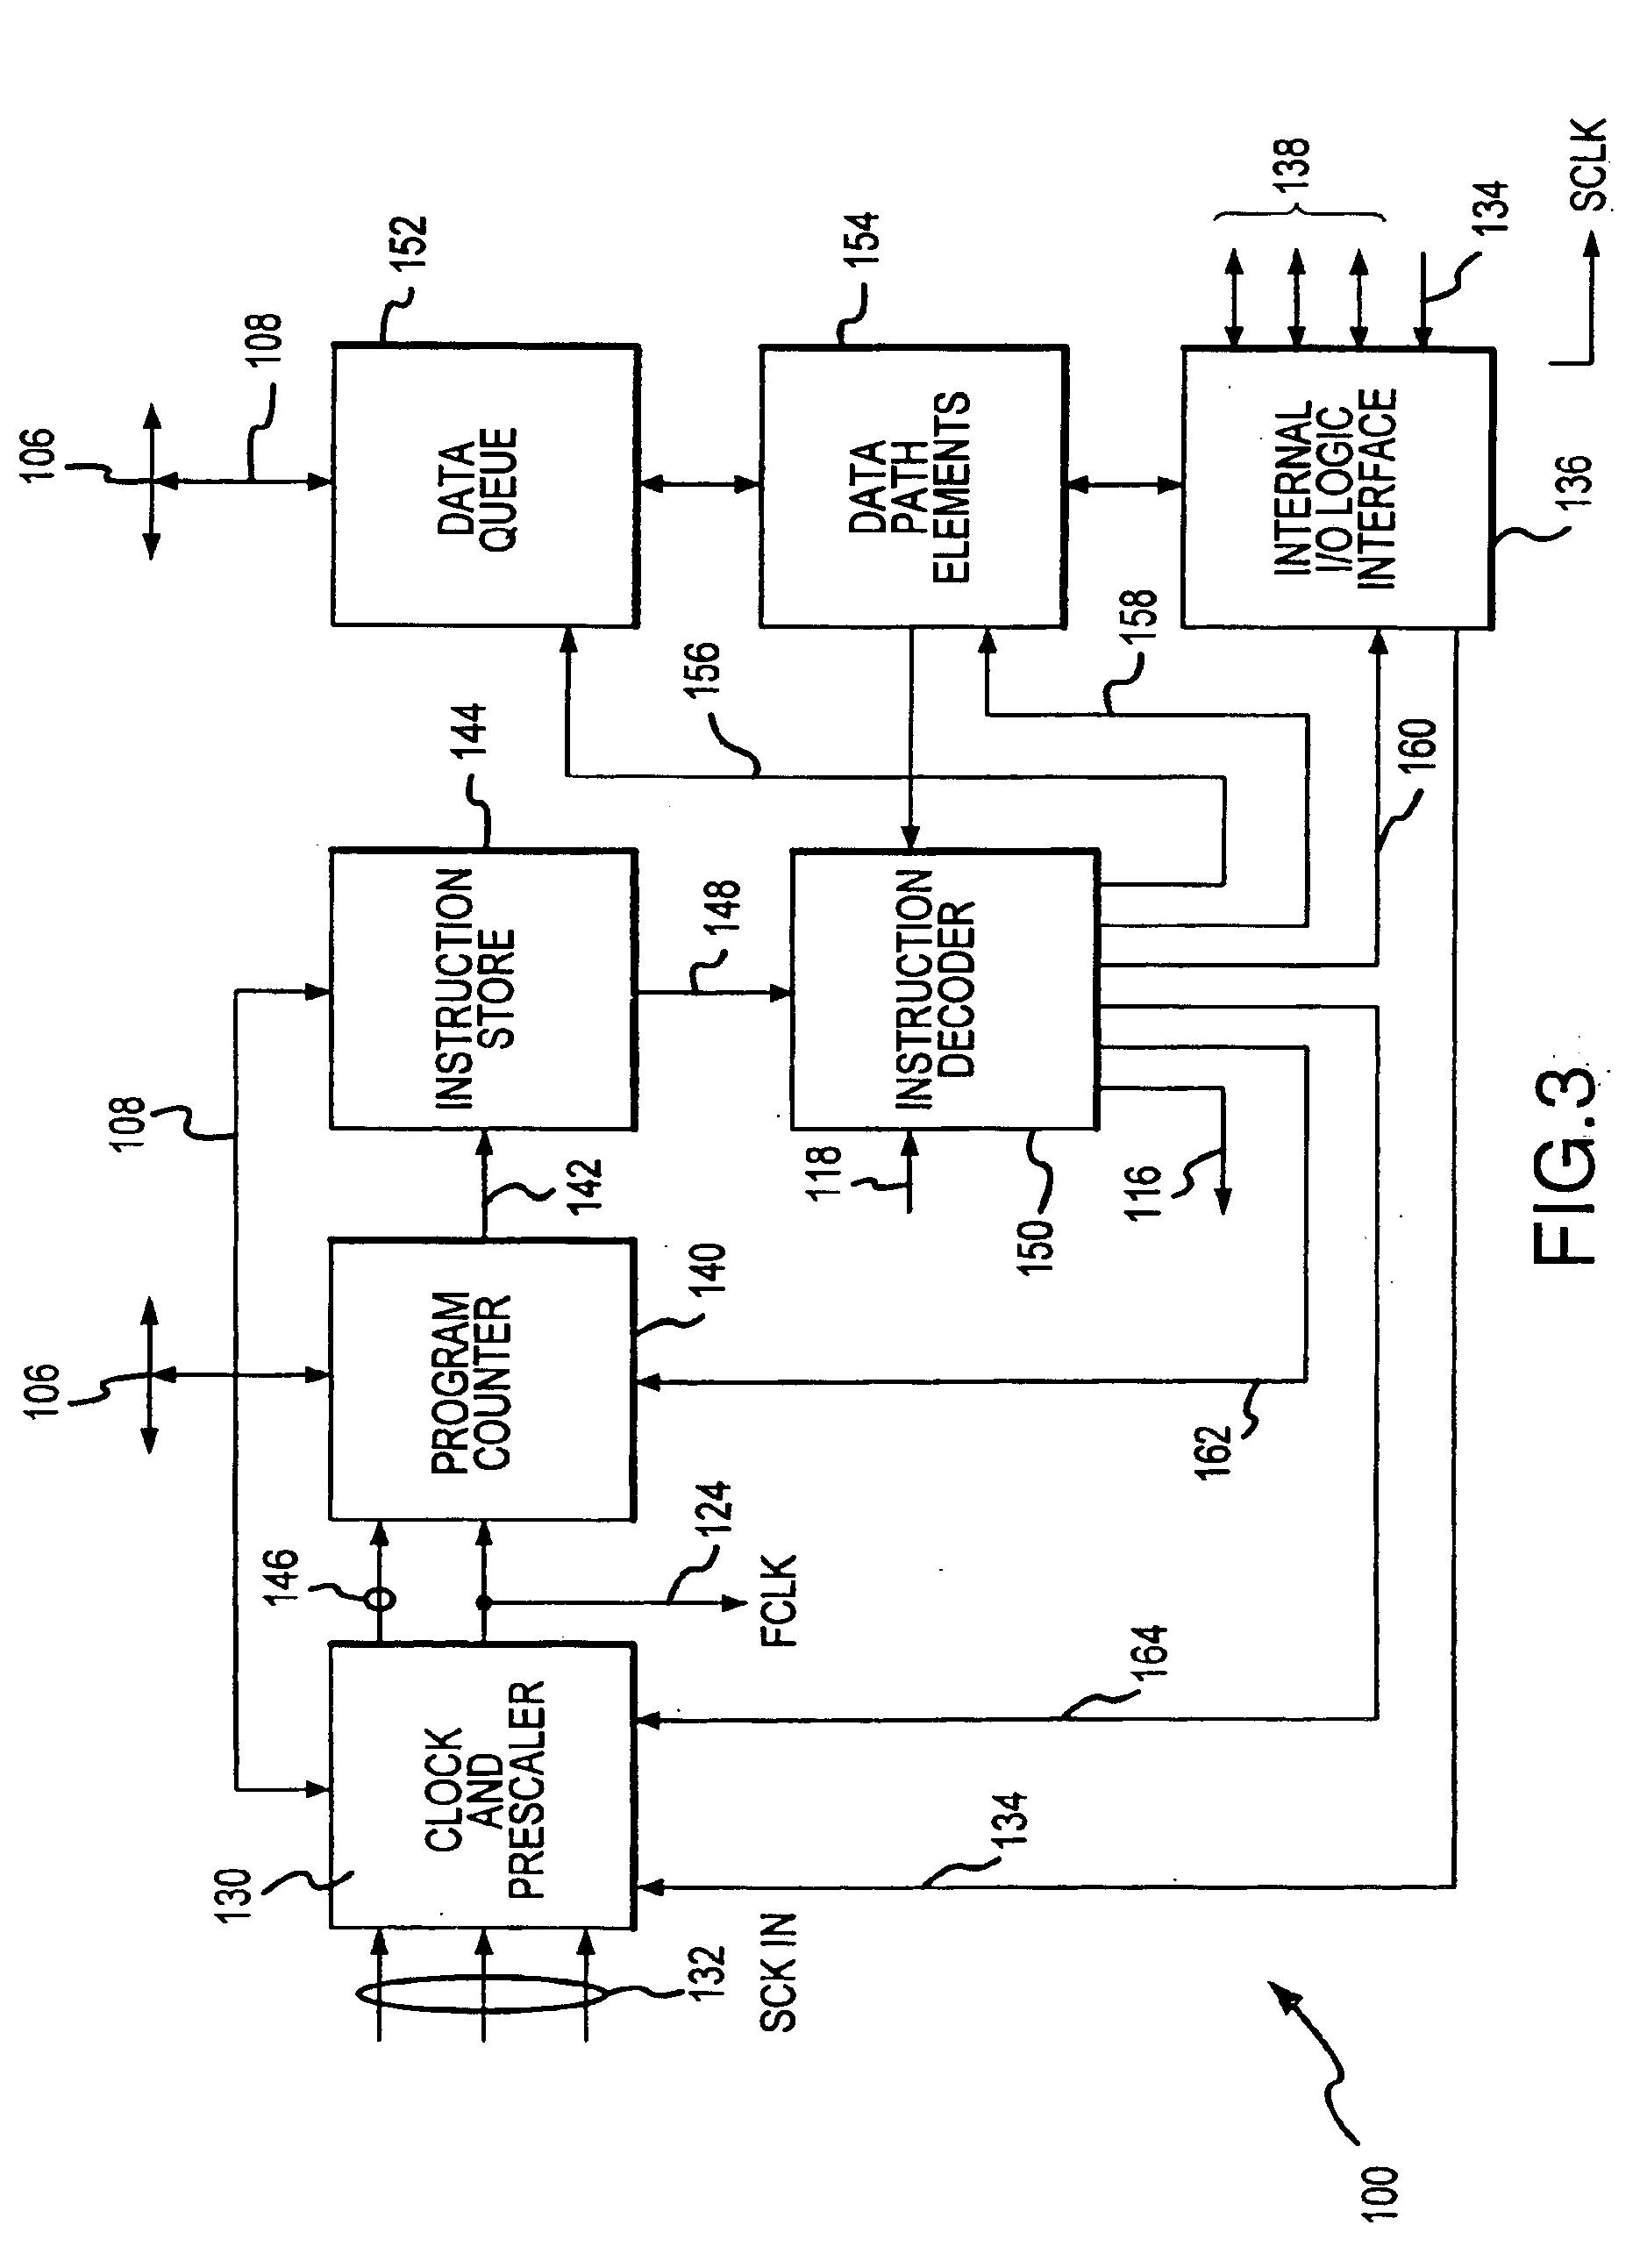 Sequencer and method of selectively inhibiting clock signals to execute reduced instruction sequences in a re-programmable I/O interface